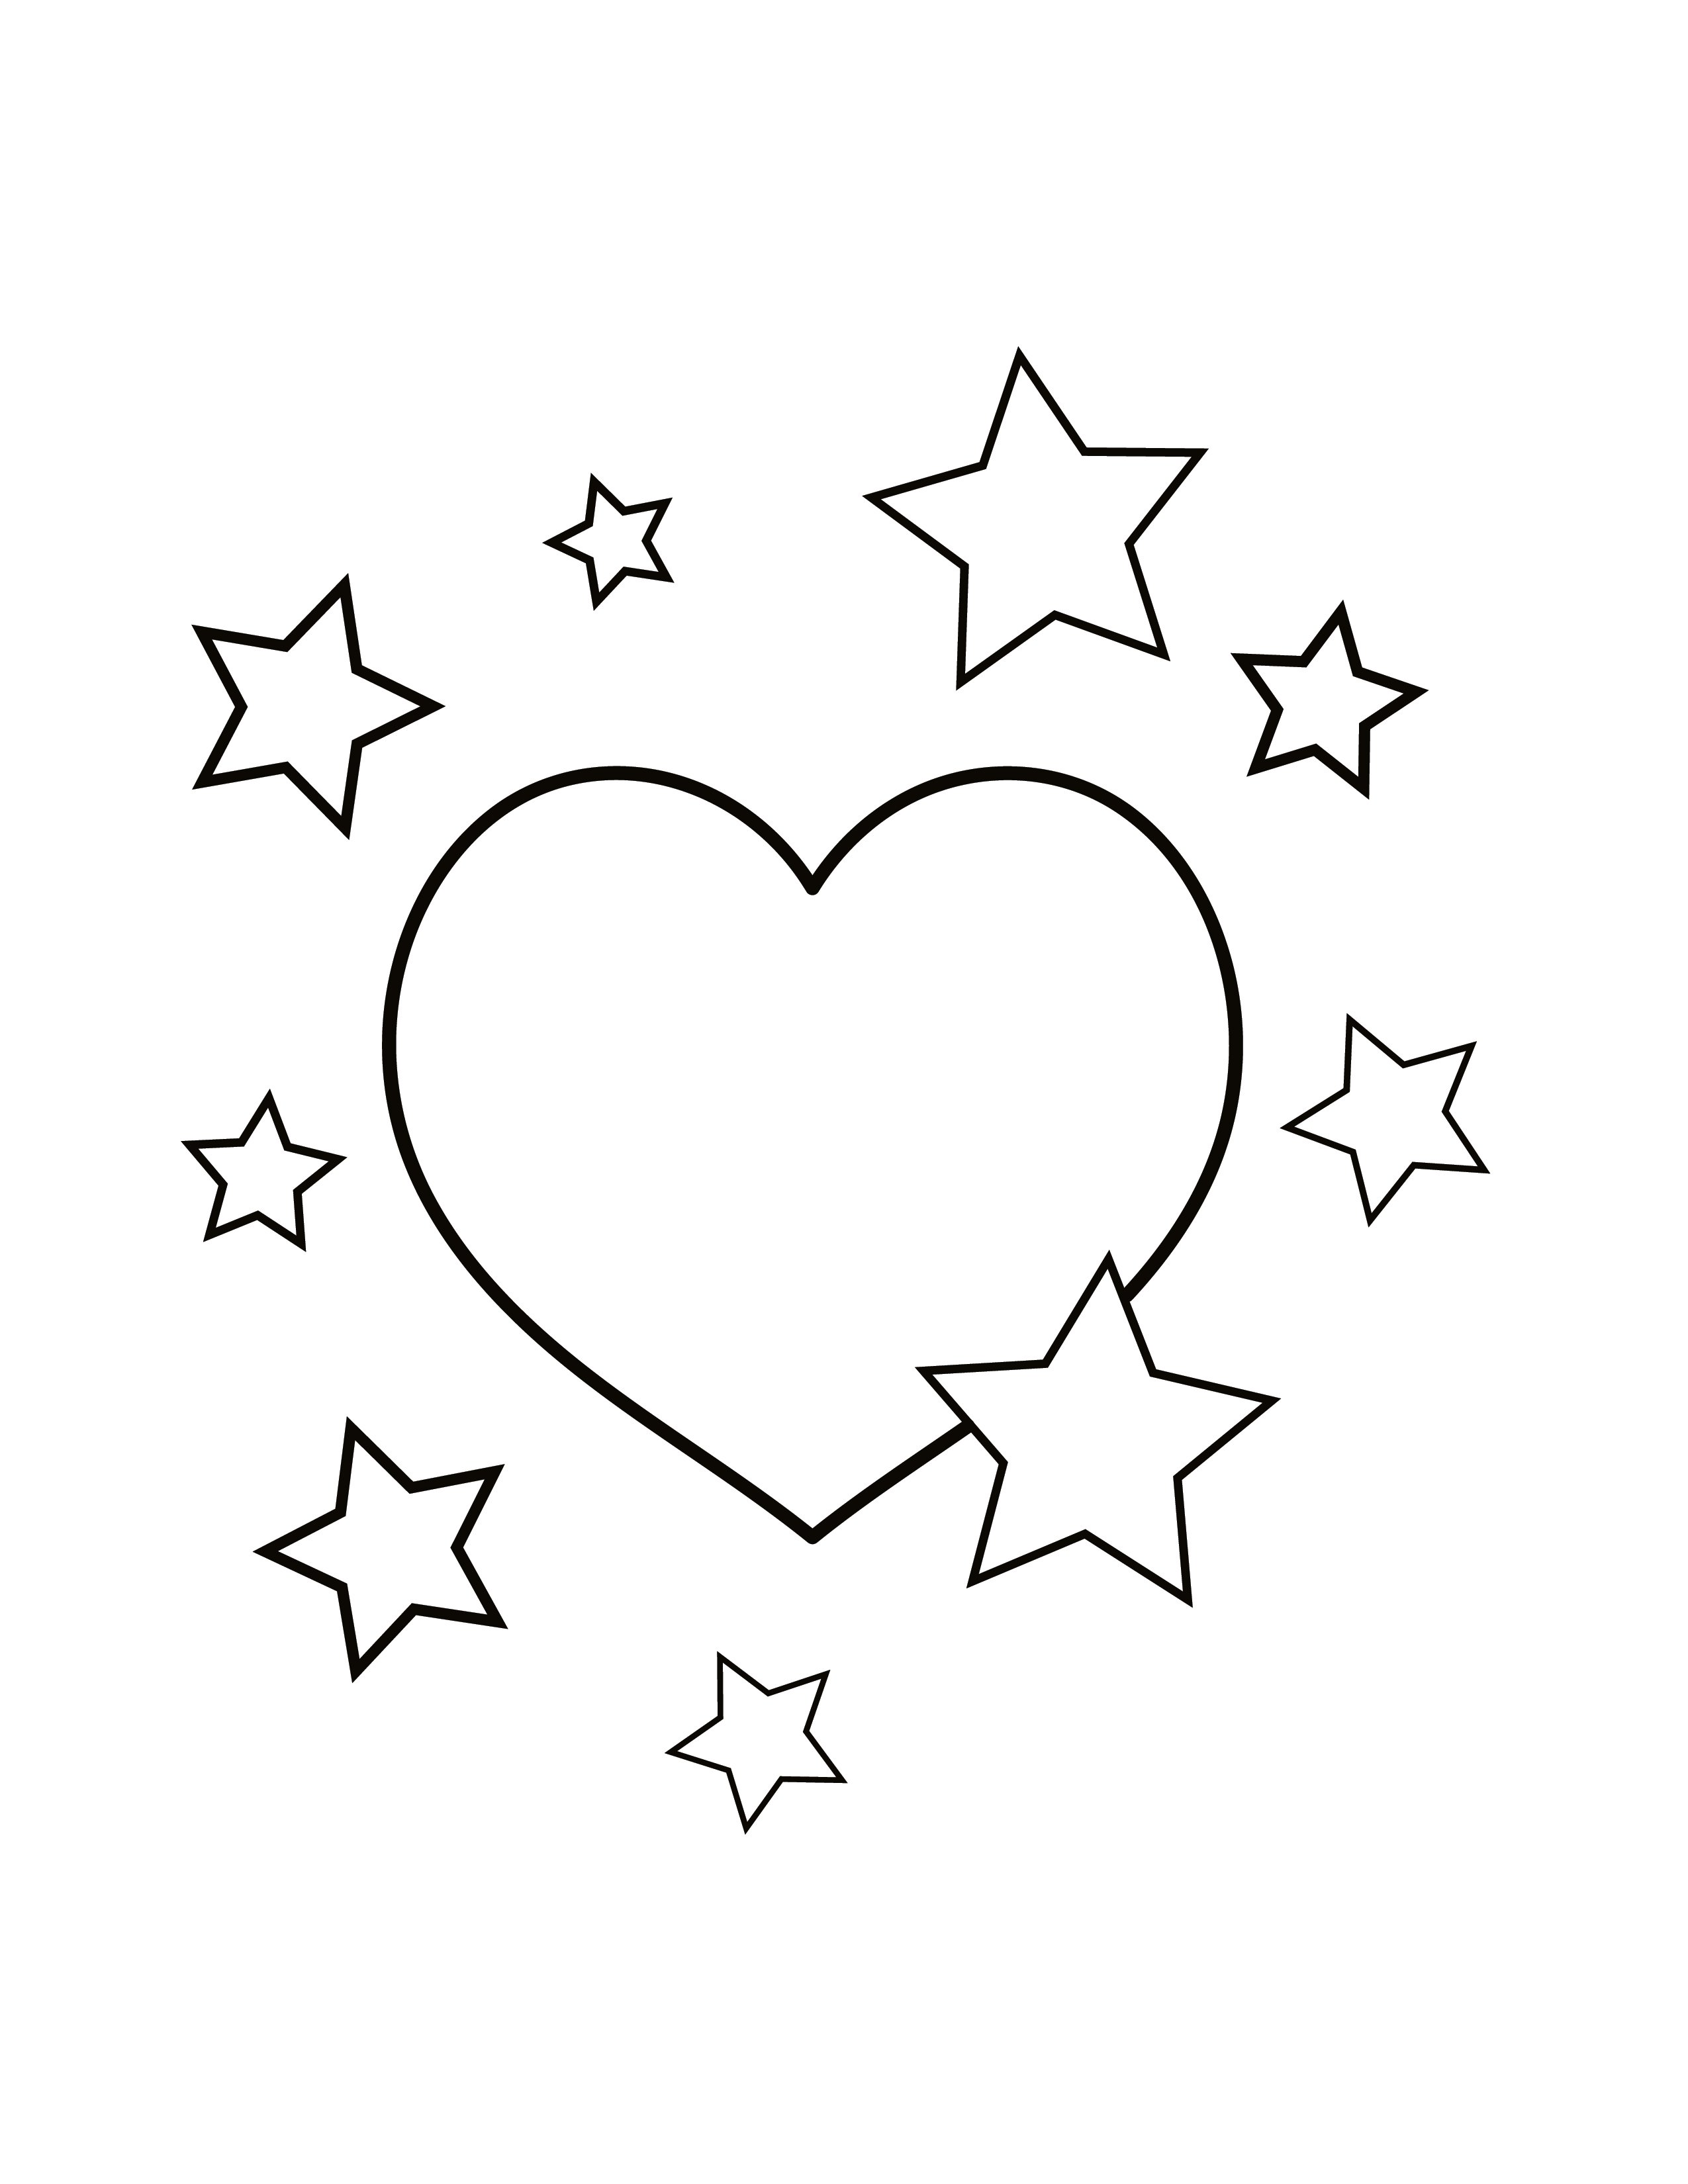 Free Skulls and Hearts Coloring Page - EPS, Illustrator, JPG, PNG, PDF